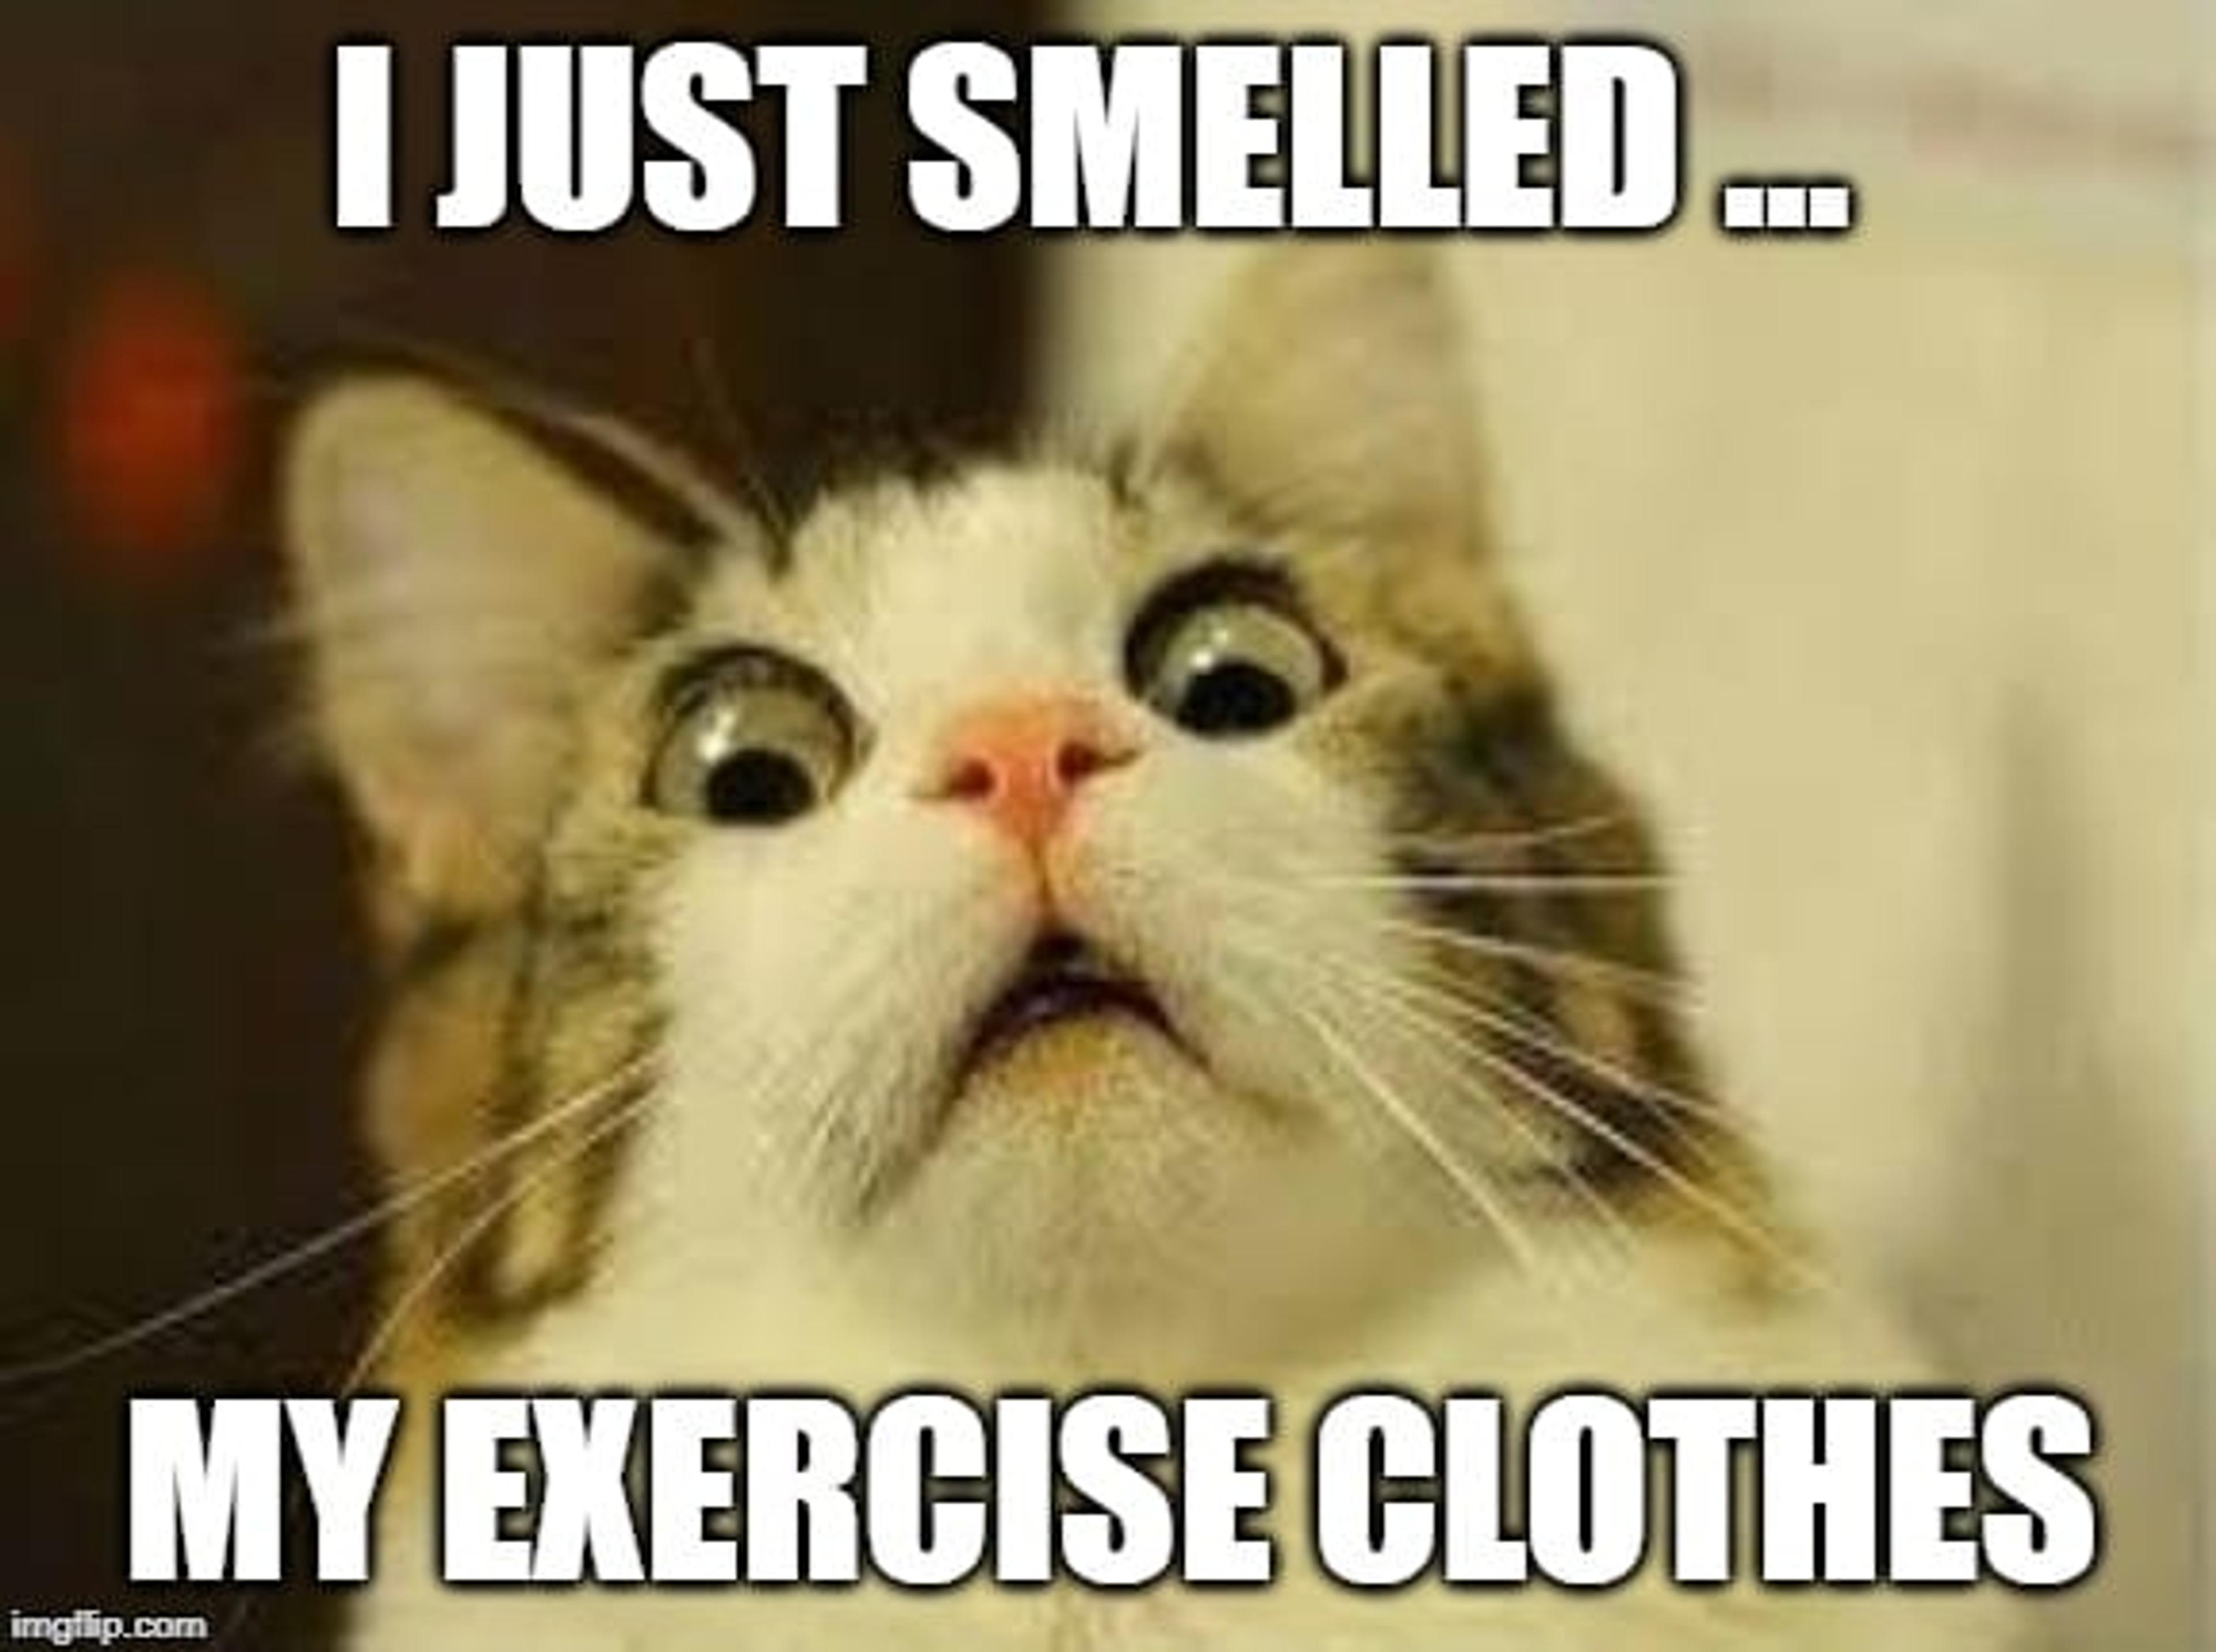 Meme of a terrified cat with caption "I just smelled ... my exercise clothes."